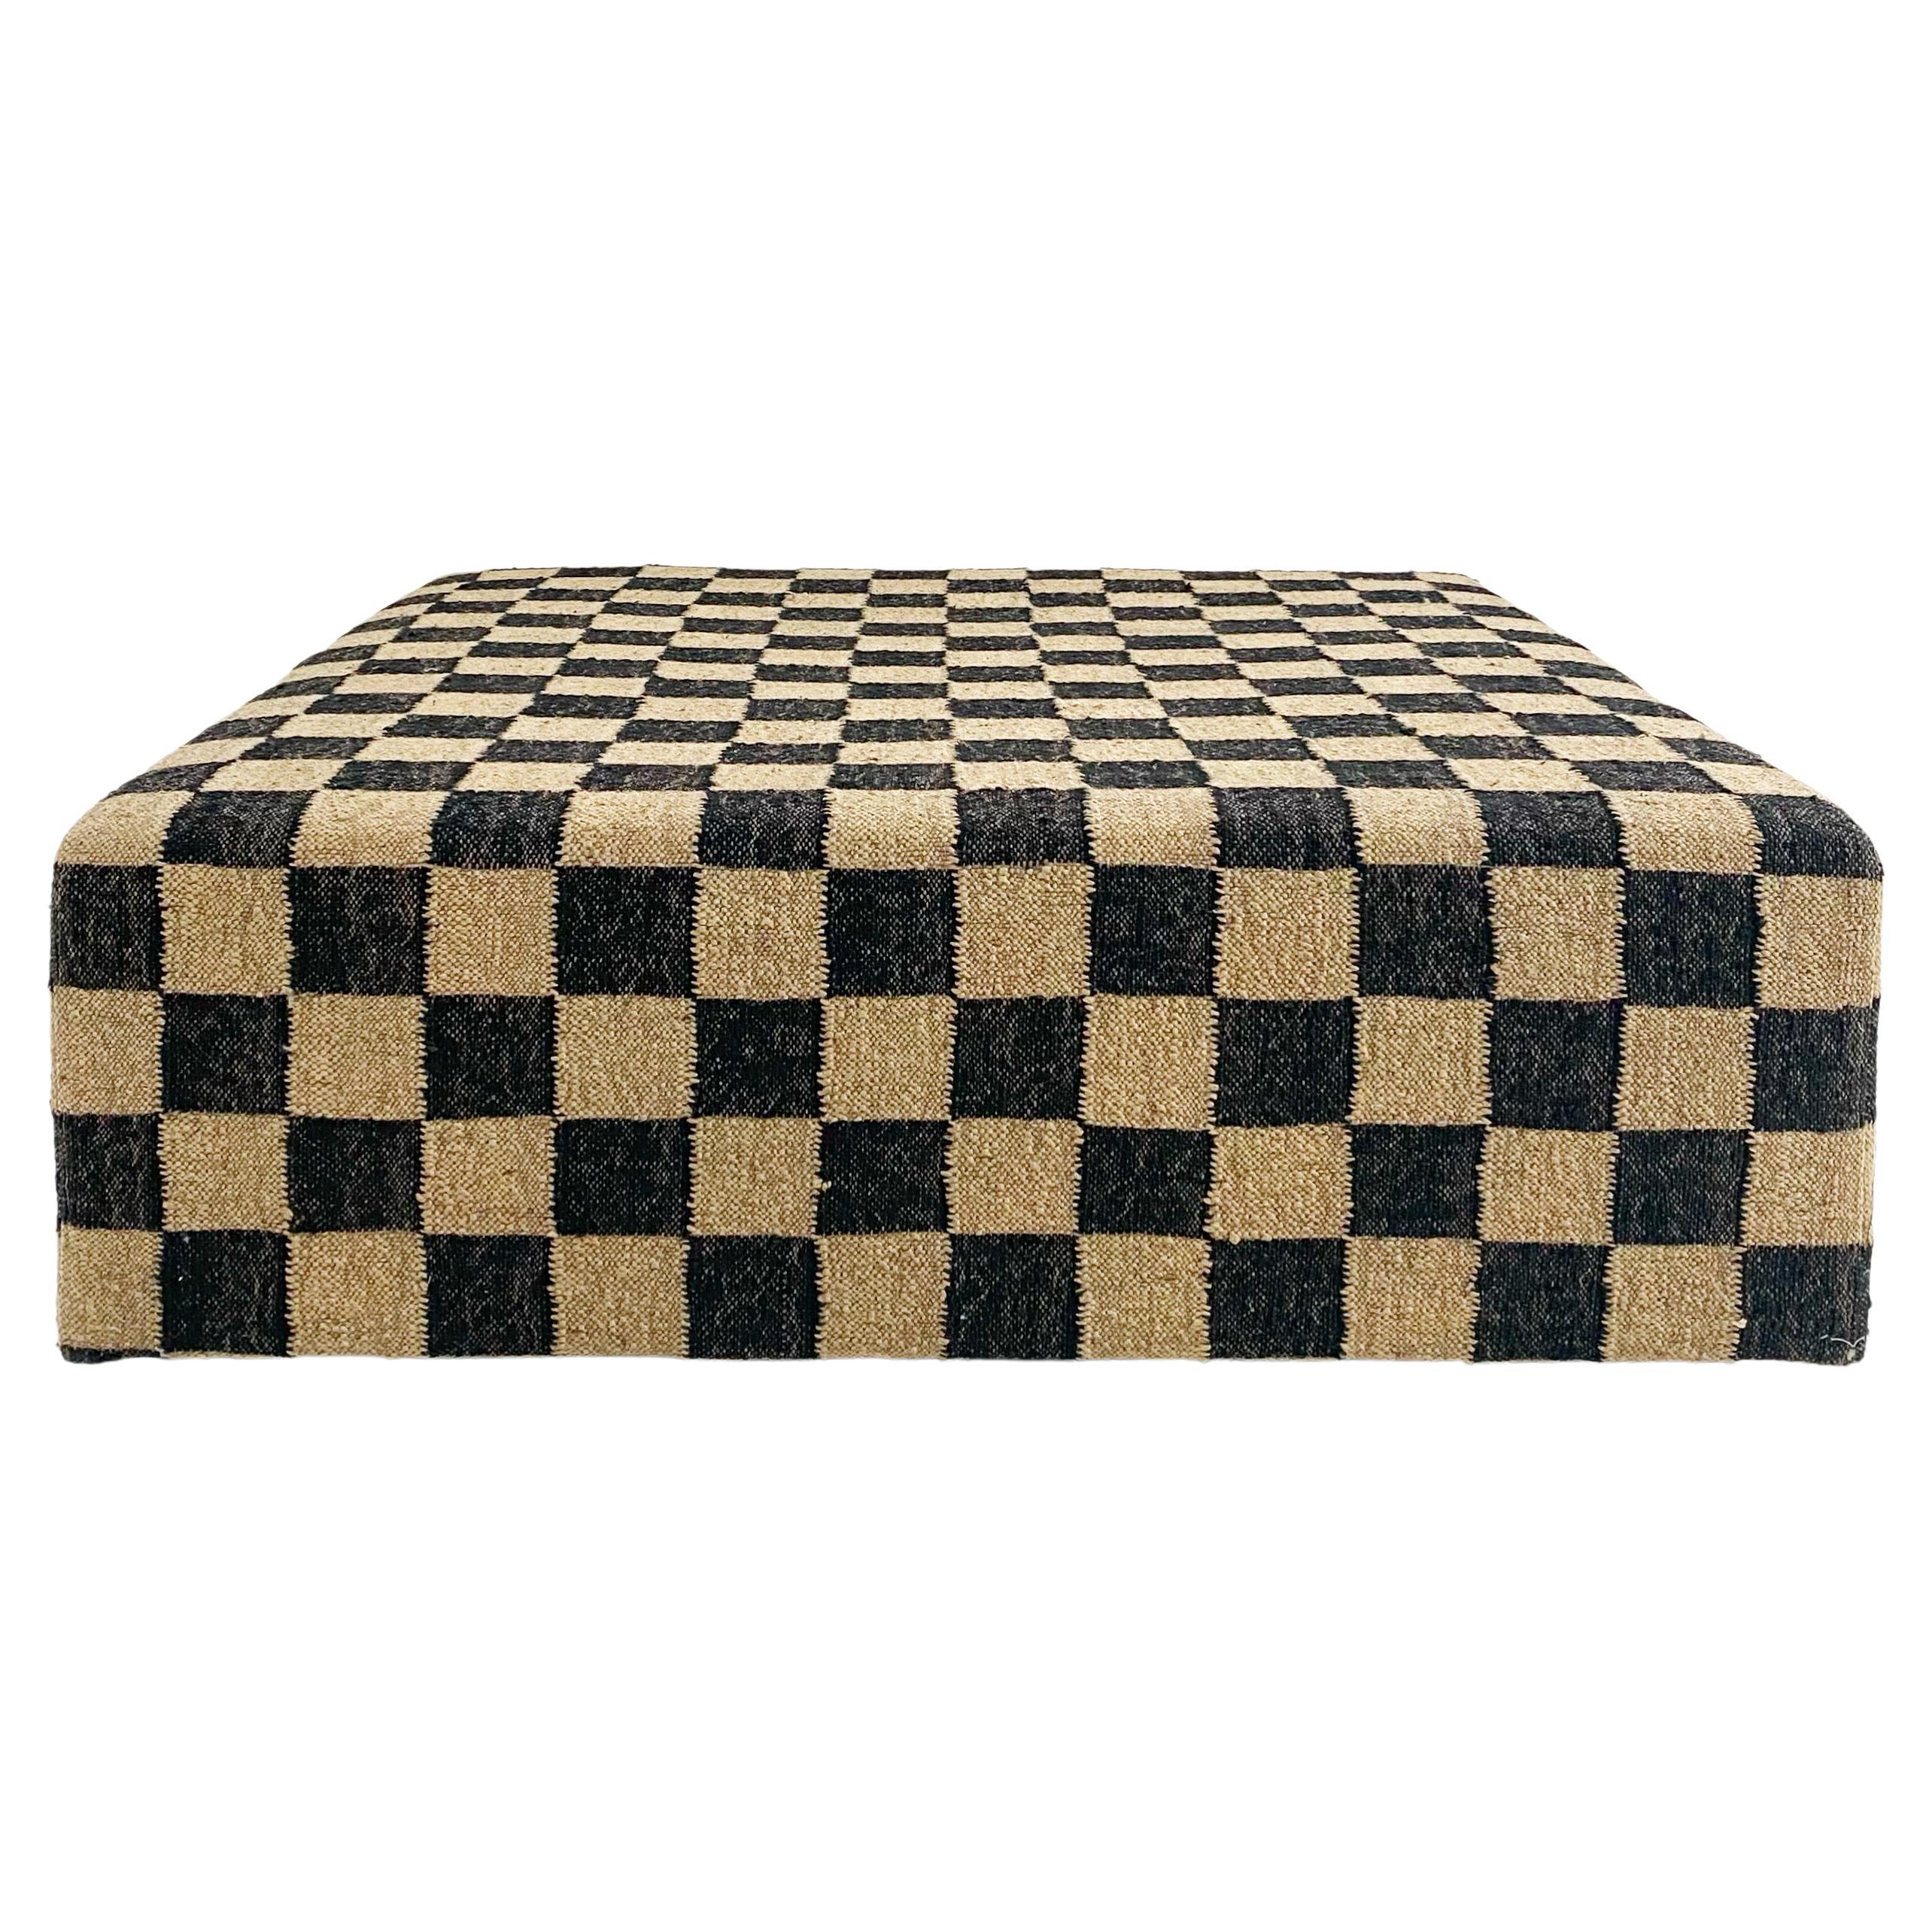 The Forsyth checkerboard ottoman is designed and handcrafted from our best-selling wool and jute checkerboard rugs. This is a versatile piece for any room adding natural texture and pattern. The perfect coffee table, ottoman, or extra seating. Each